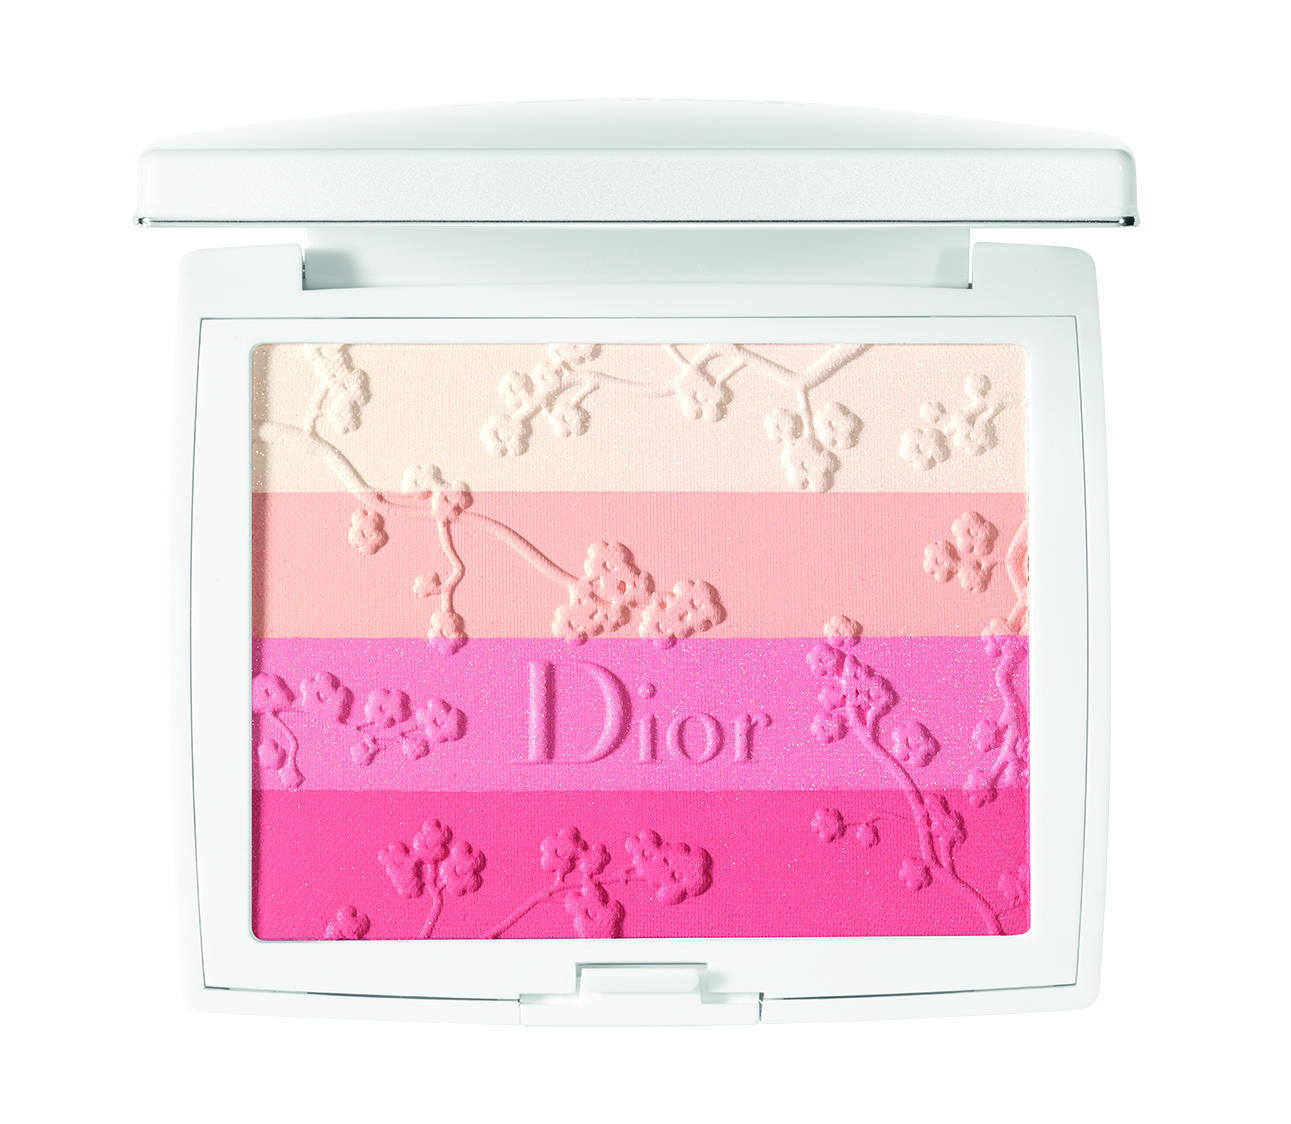 DIORThe Diorsnow Cherry Bloom palette is perfect when you're in between holidays. Go from sun-kissed pink to neutral chic to suit your changing skin colour. Works great on the eyes too, HK$460